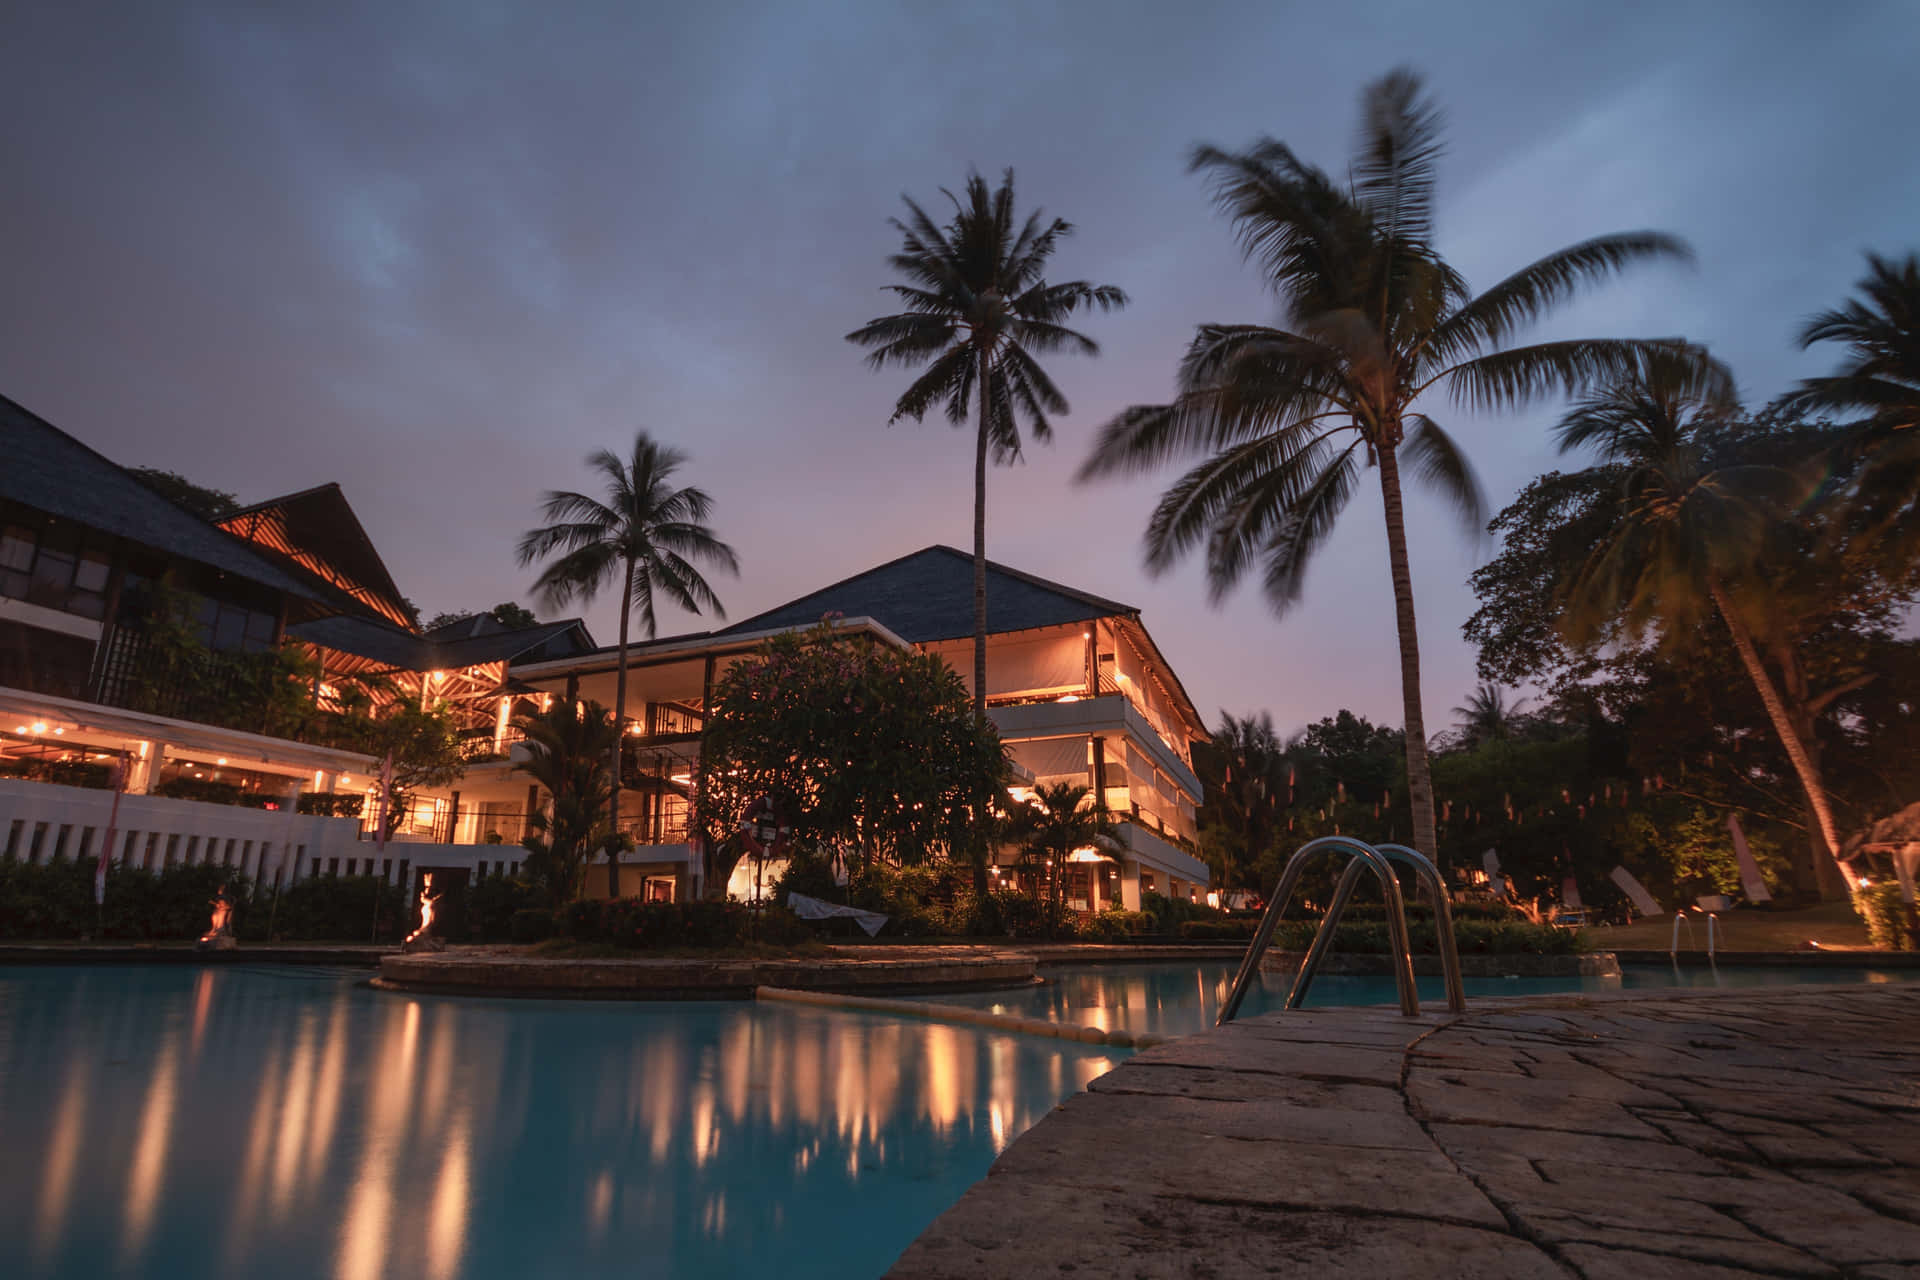 A Resort With A Pool And Palm Trees At Night